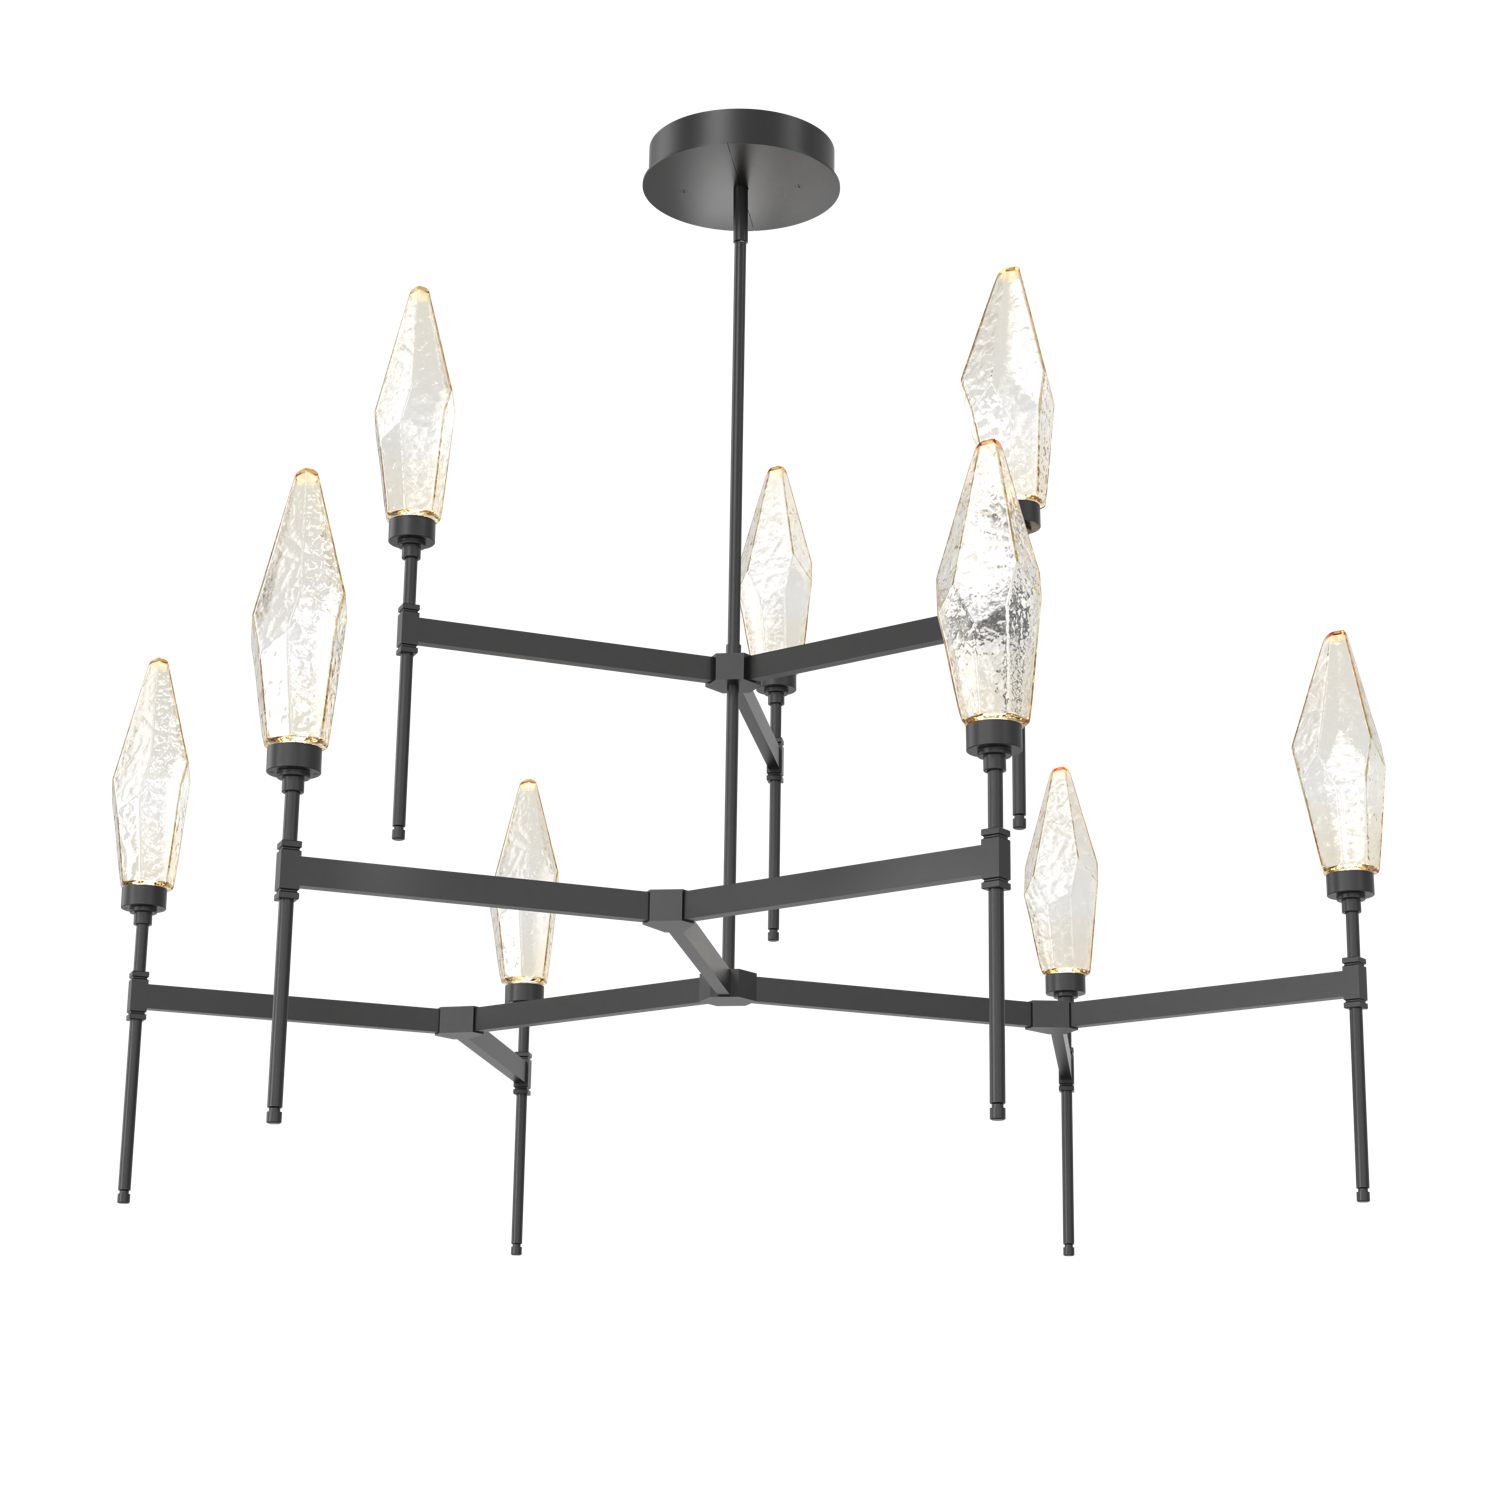 CHB0050-54-MB-CA-Hammerton-Studio-Rock-Crystal-54-inch-round-two-tier-belvedere-chandelier-with-matte-black-finish-and-chilled-amber-blown-glass-shades-and-LED-lamping